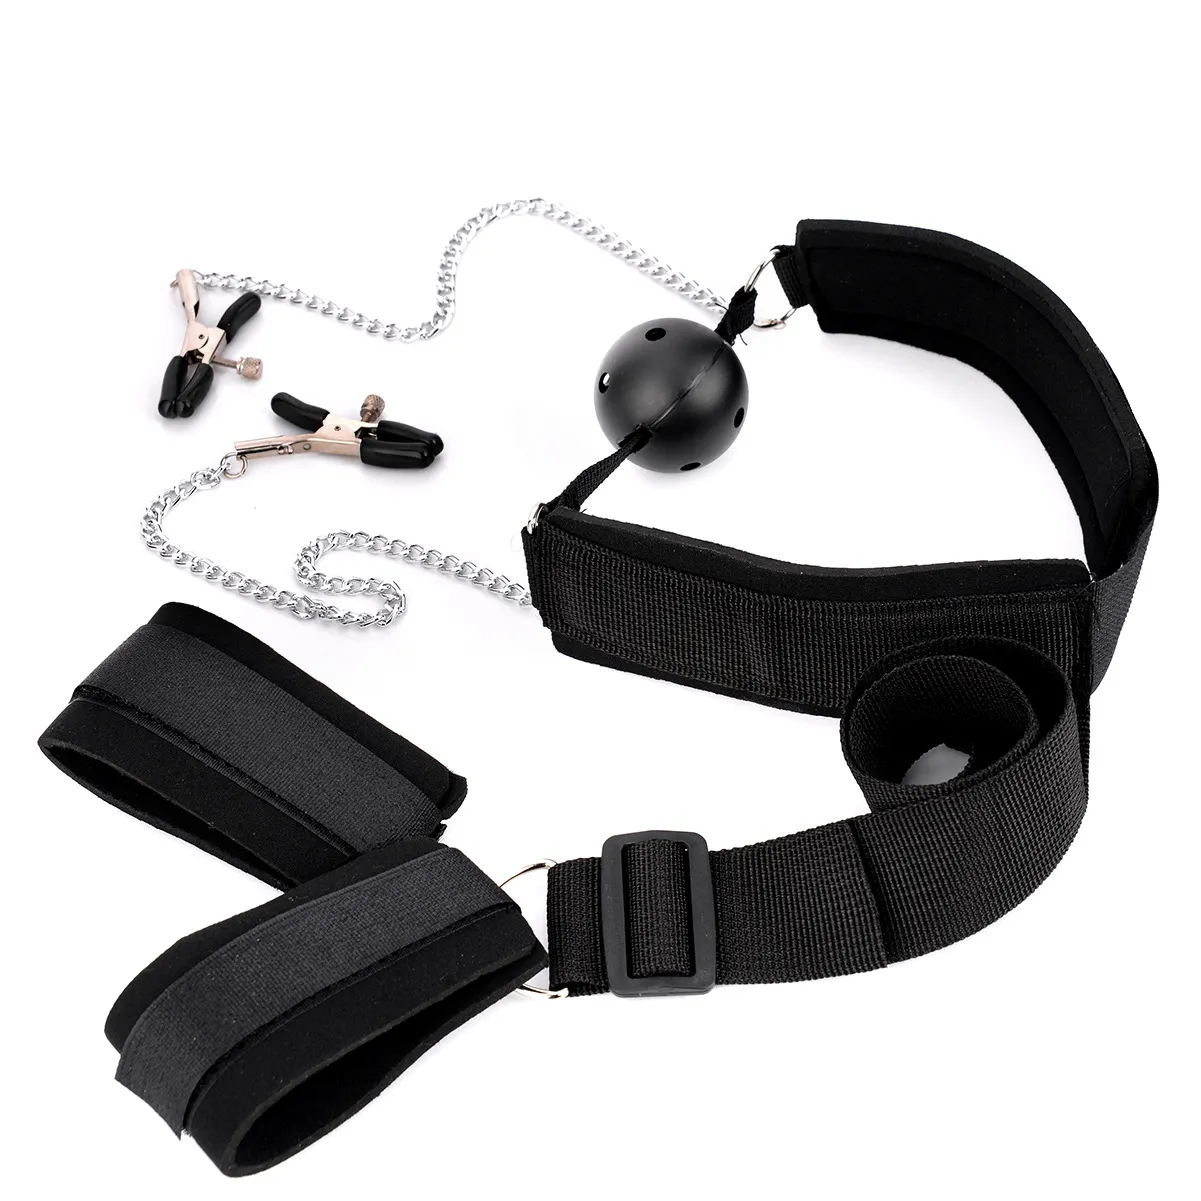 Sex Restraints - Sex Bandage Kits Porno Apparel Restraints Handcuffs Sexy Nipple Clamps Open  Mouth Gag Sex Toys Exotic Accessories From Agoodtime, $4.85 | DHgate.Com